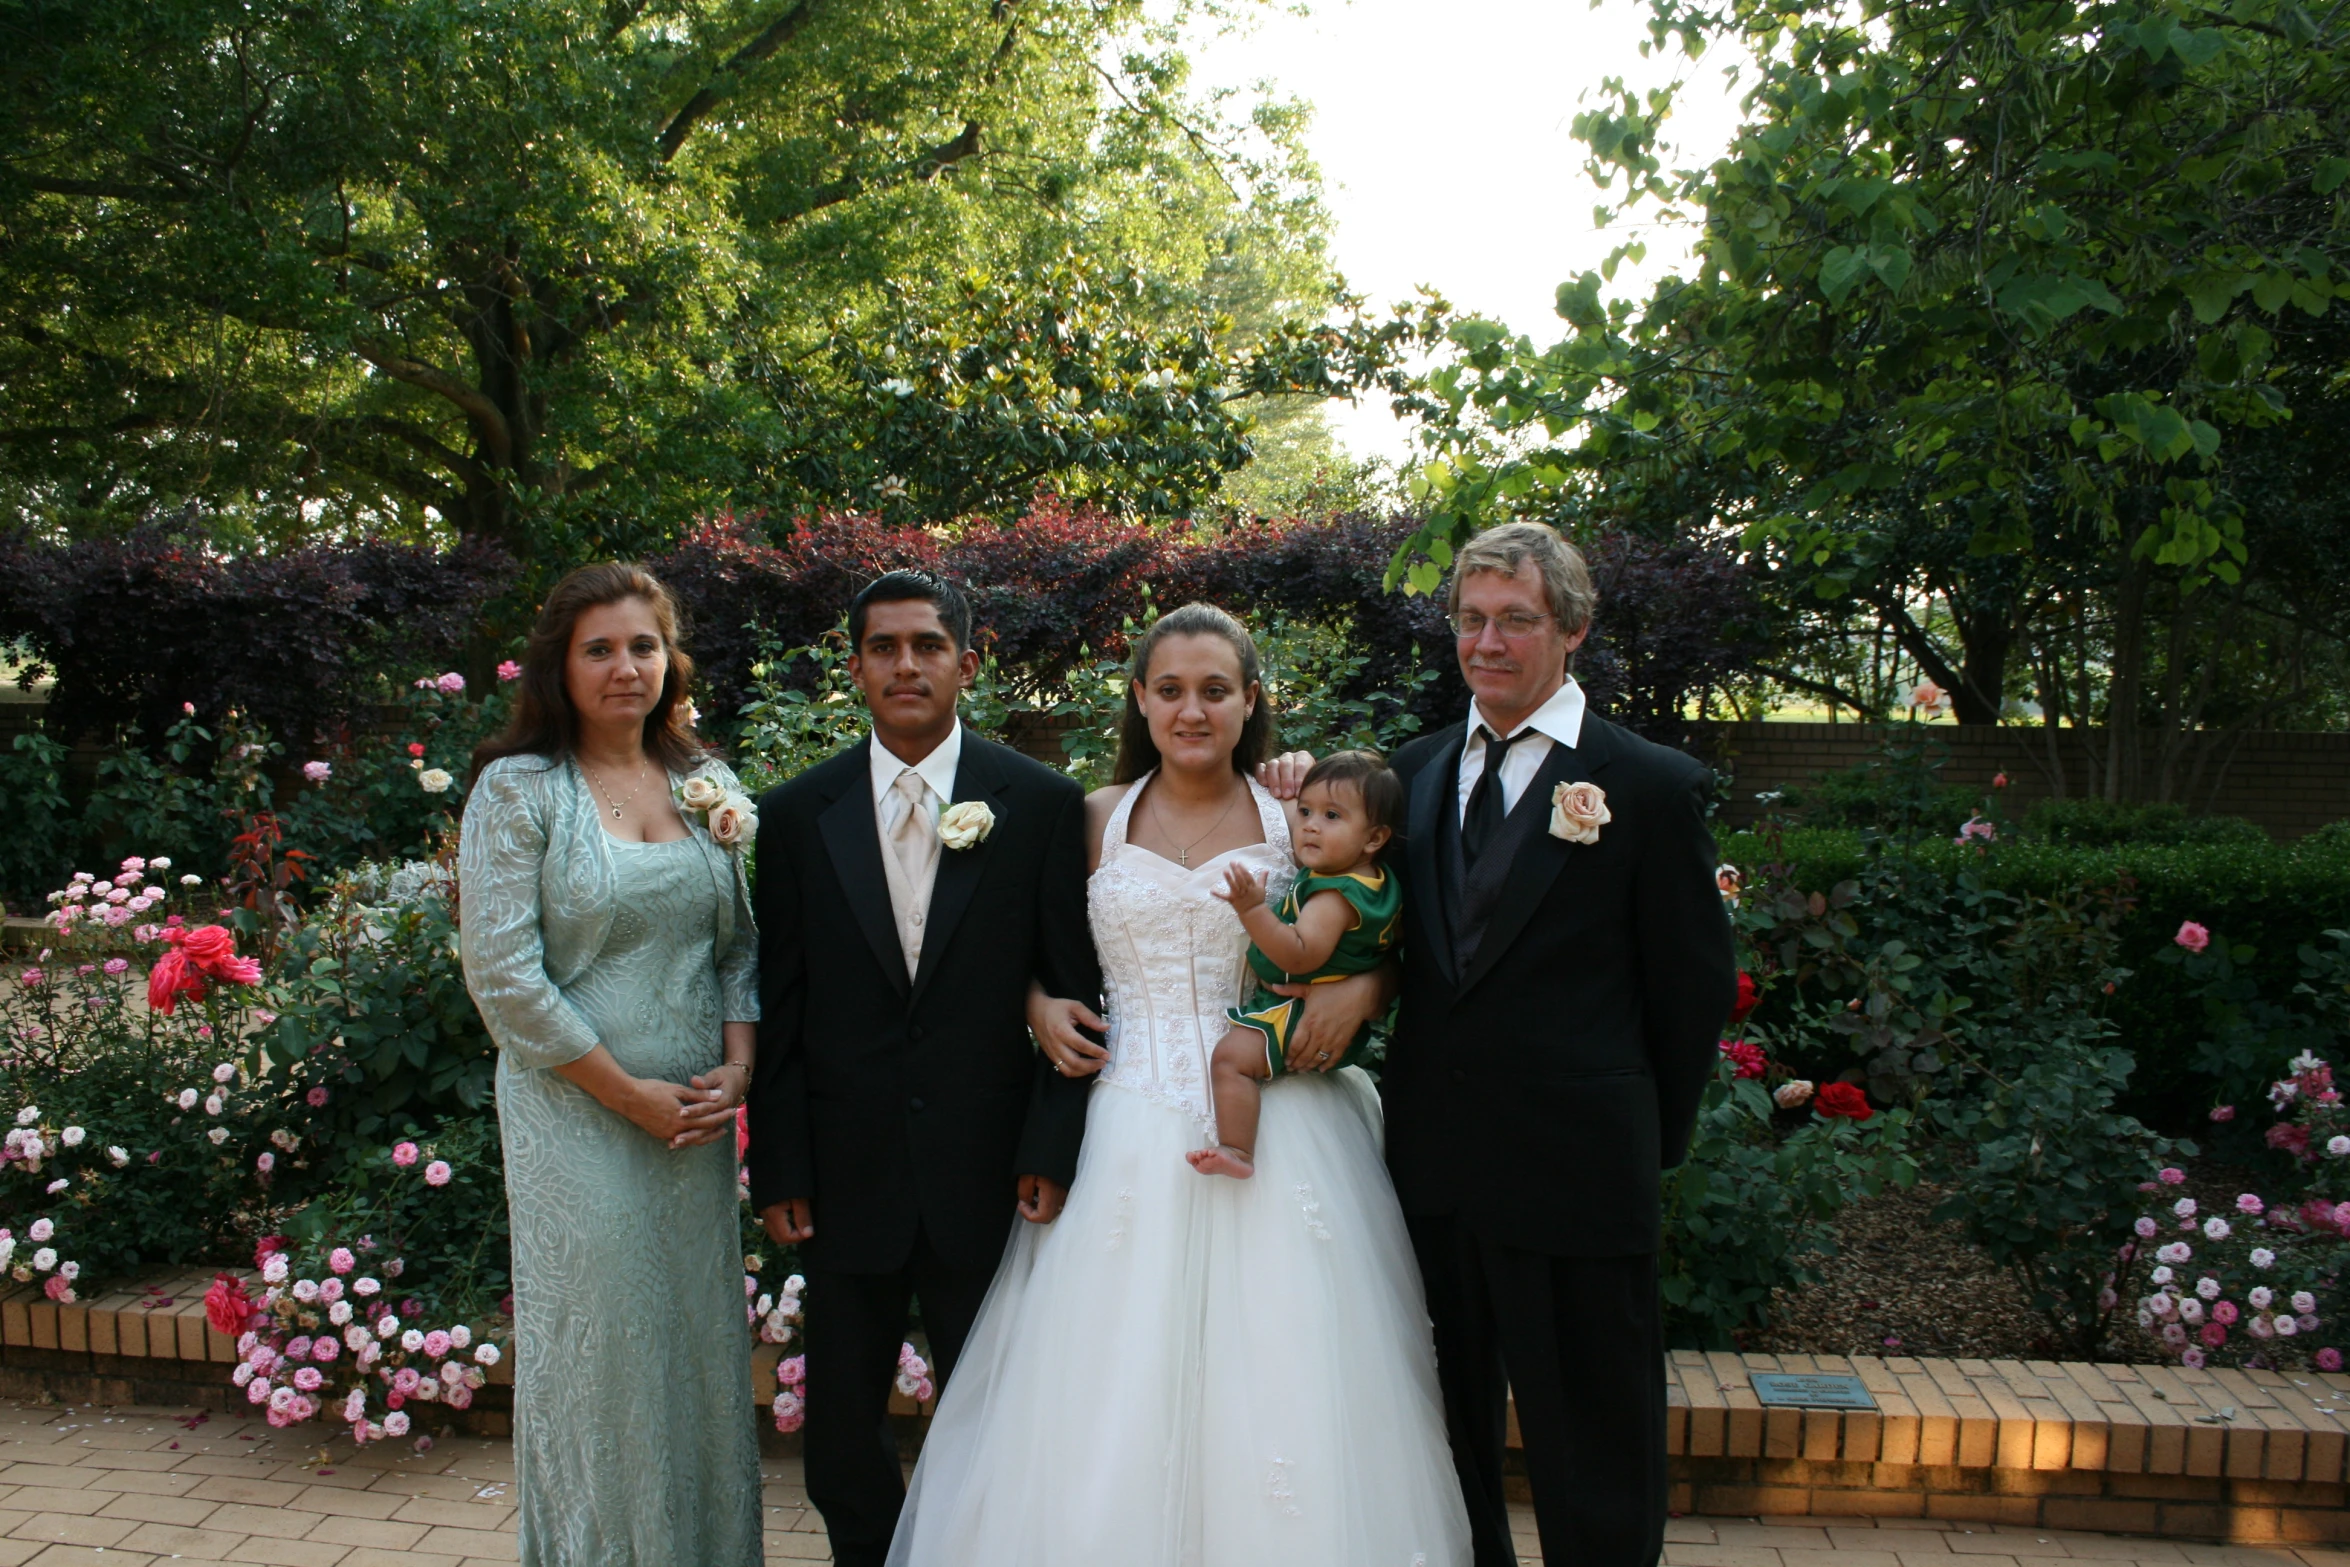 a man in a suit and a woman in a gown hold a baby while two other people pose for the camera